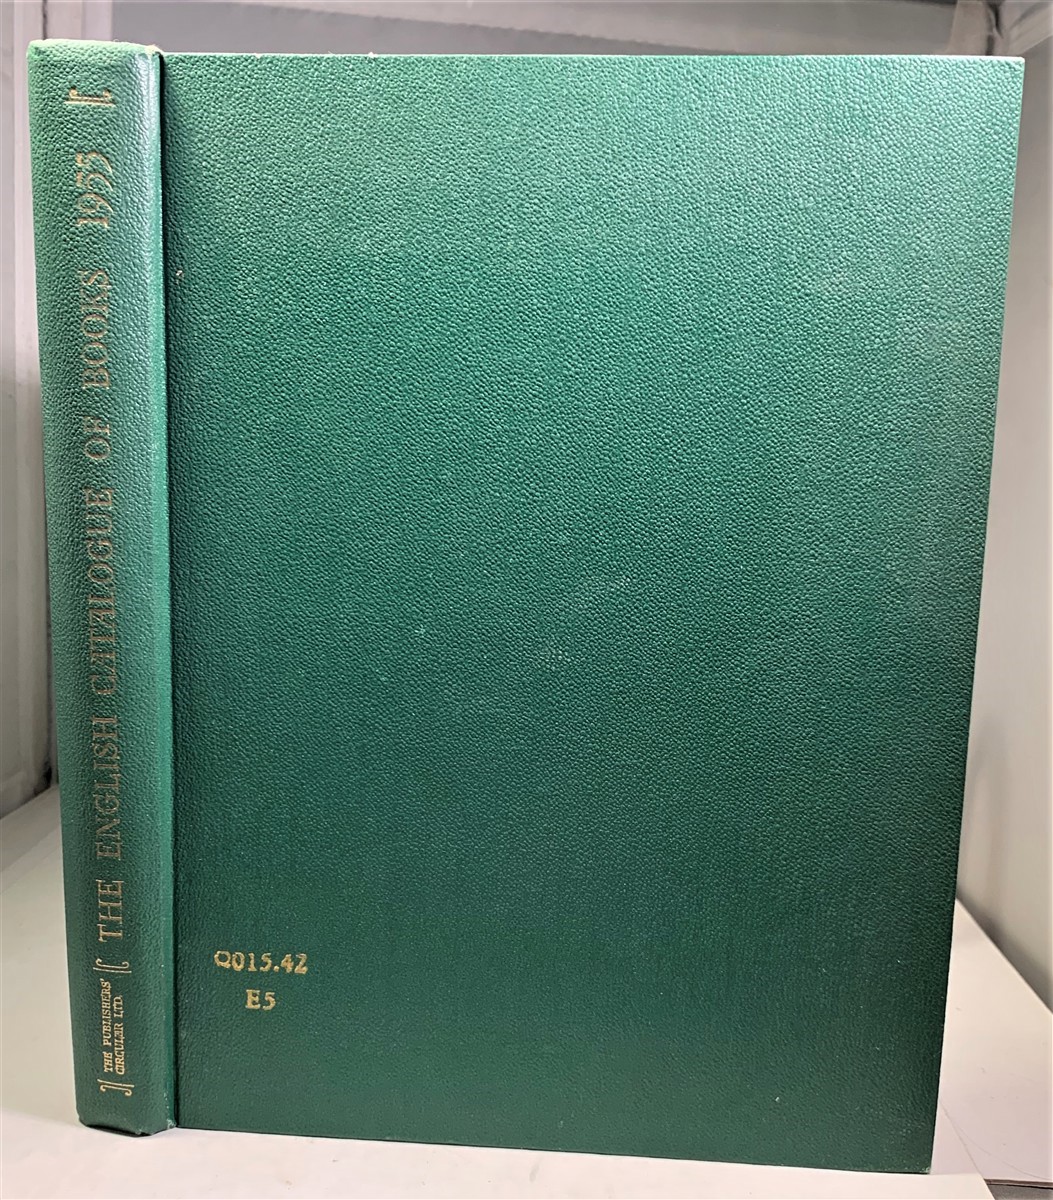 THE PUBLISHERS' CIRCULAR LIMITED - The English Catalogue of Books for 1955